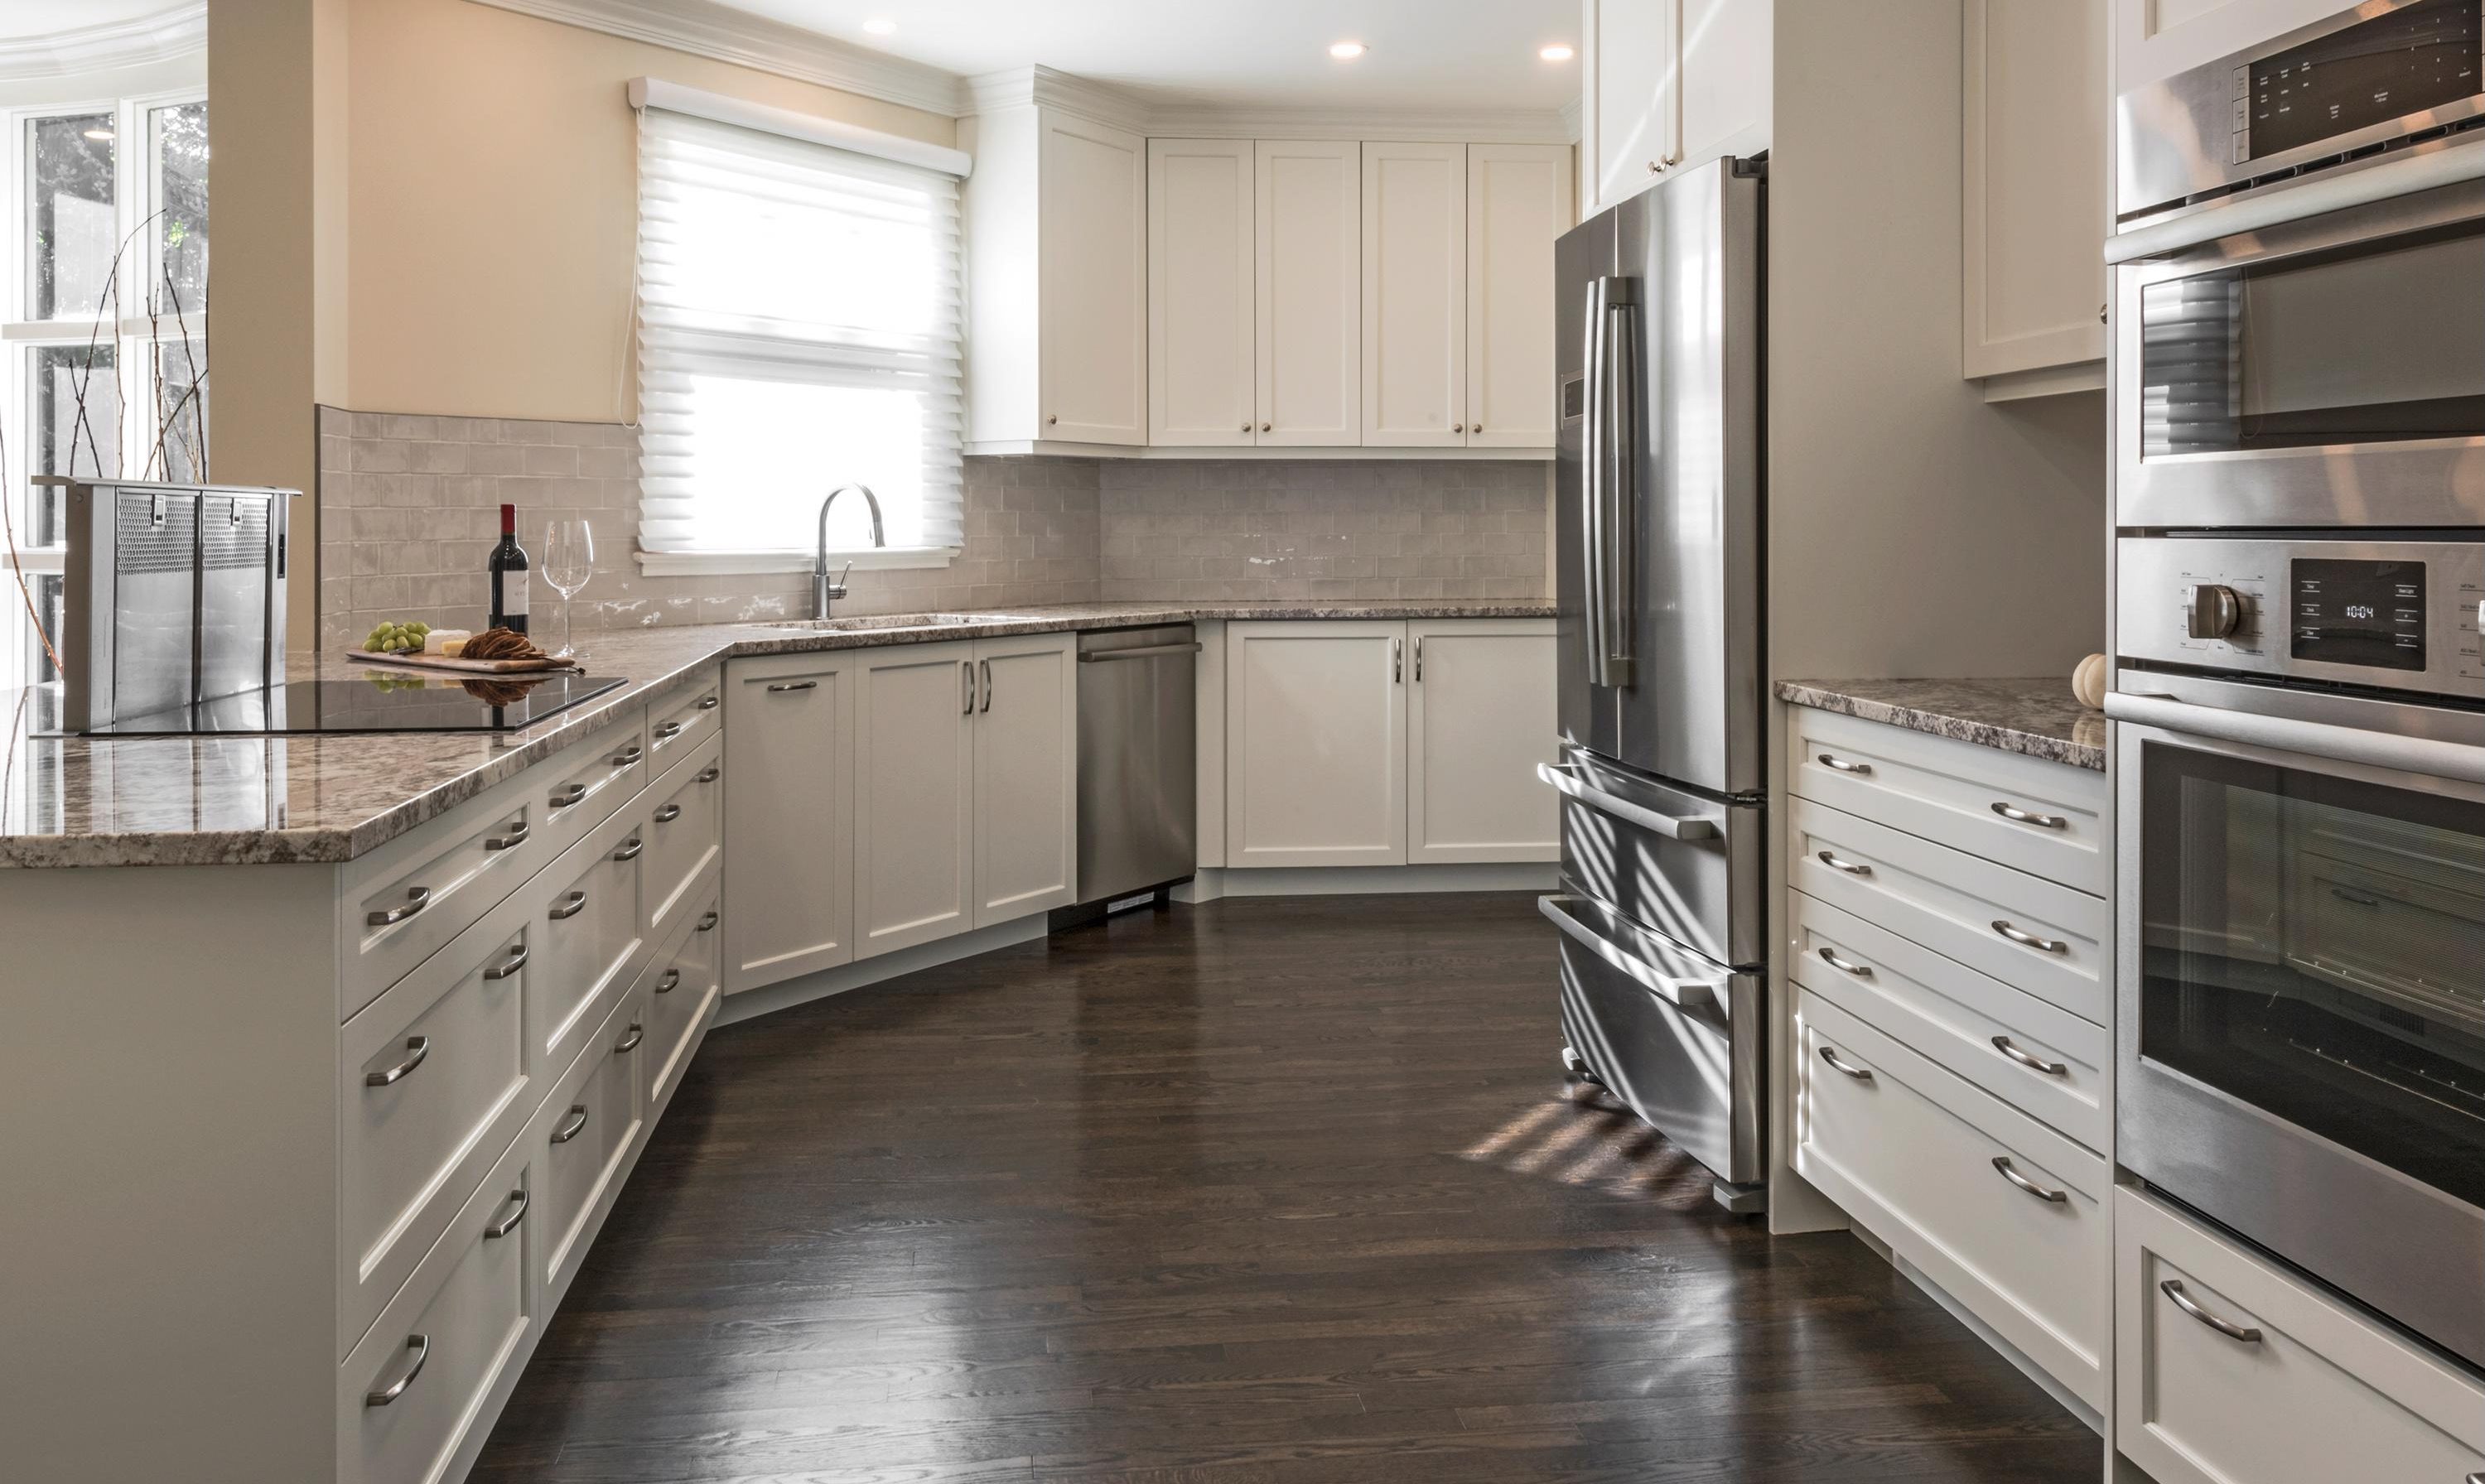 7 Tips for Decorating With White Stainless Steel Appliances